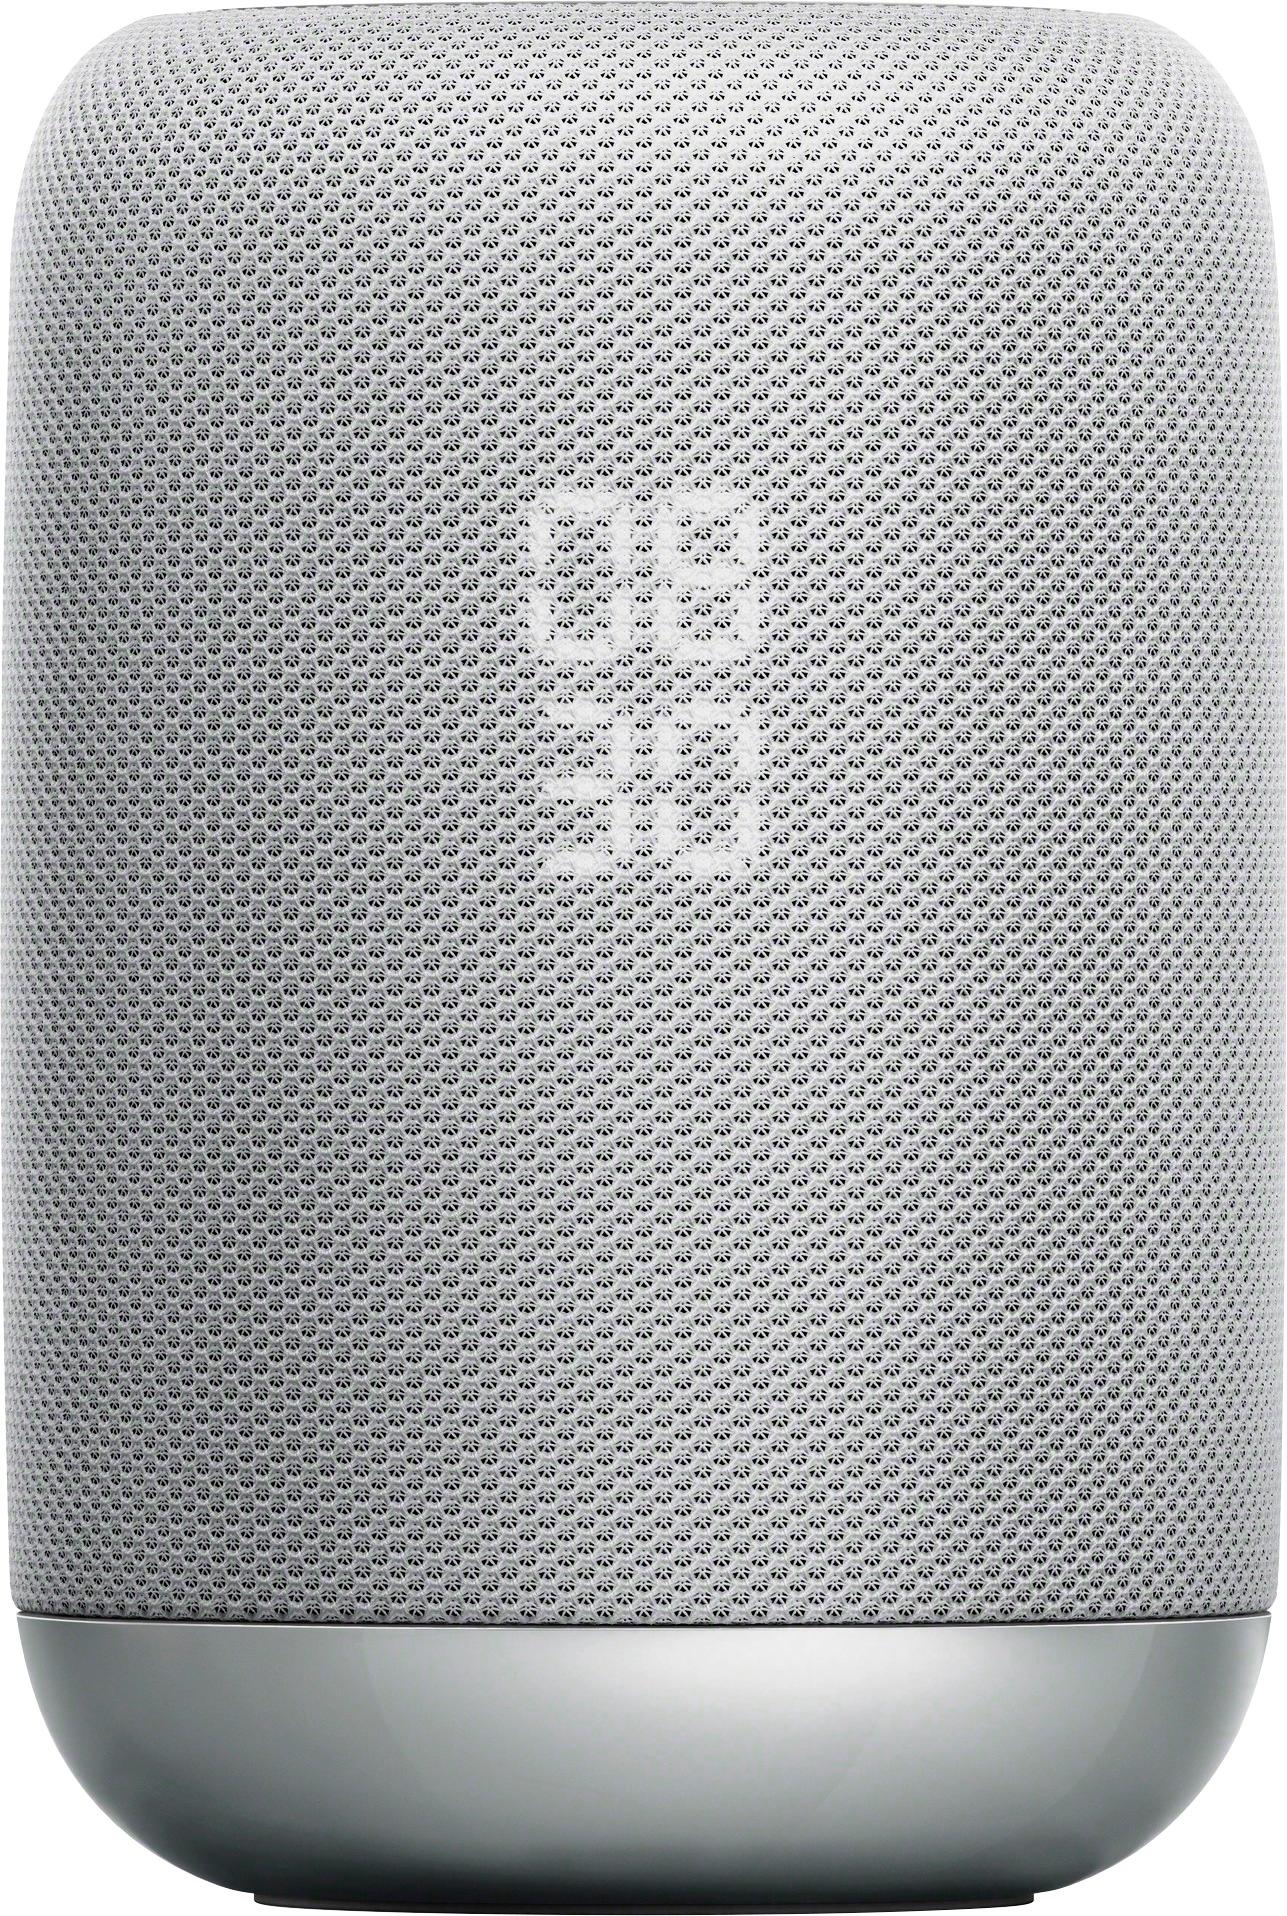 Sony Smart Speaker LFS50G with Google Assistant Built In- White 